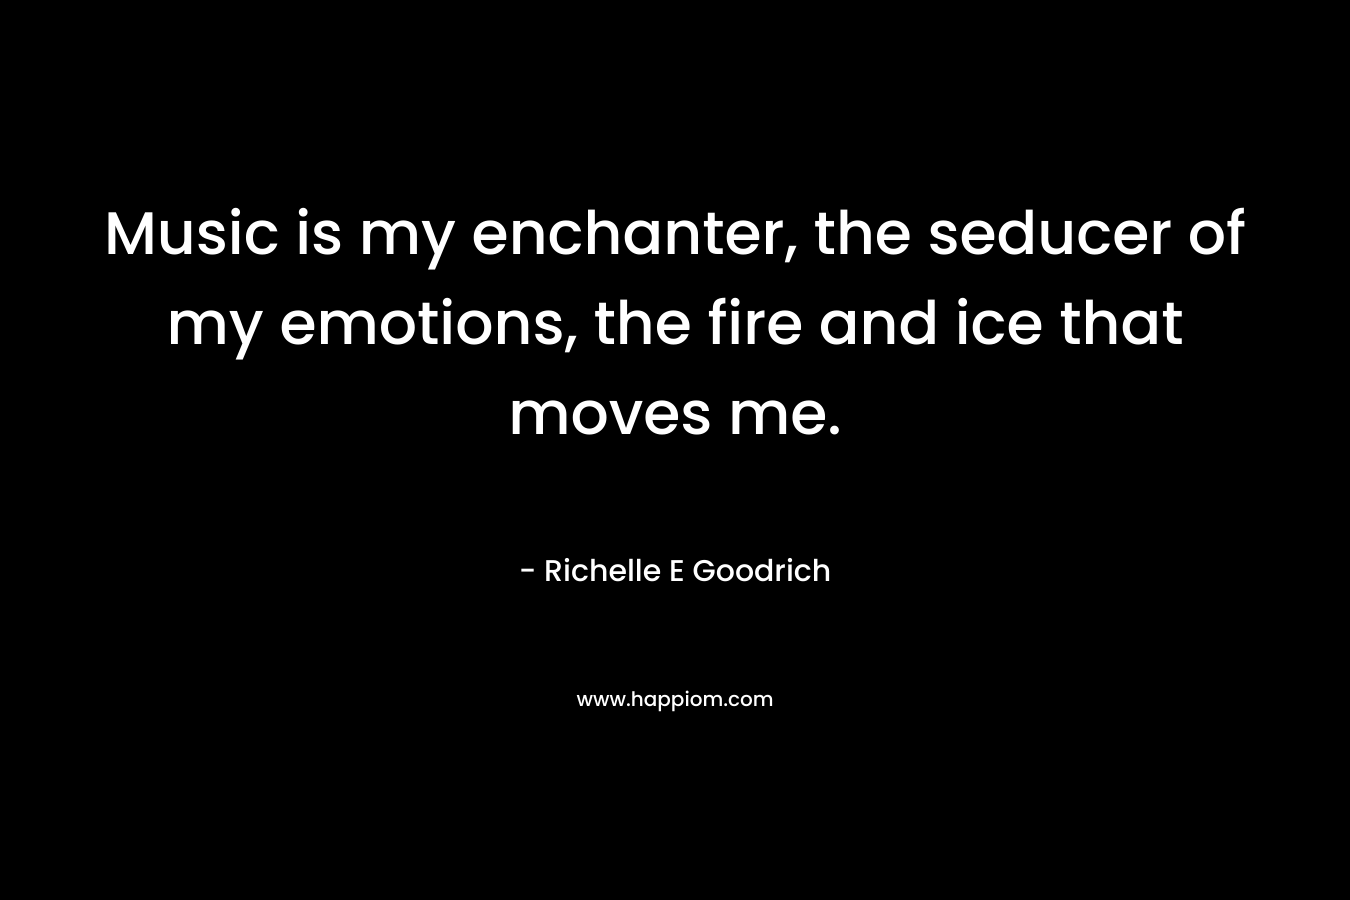 Music is my enchanter, the seducer of my emotions, the fire and ice that moves me.